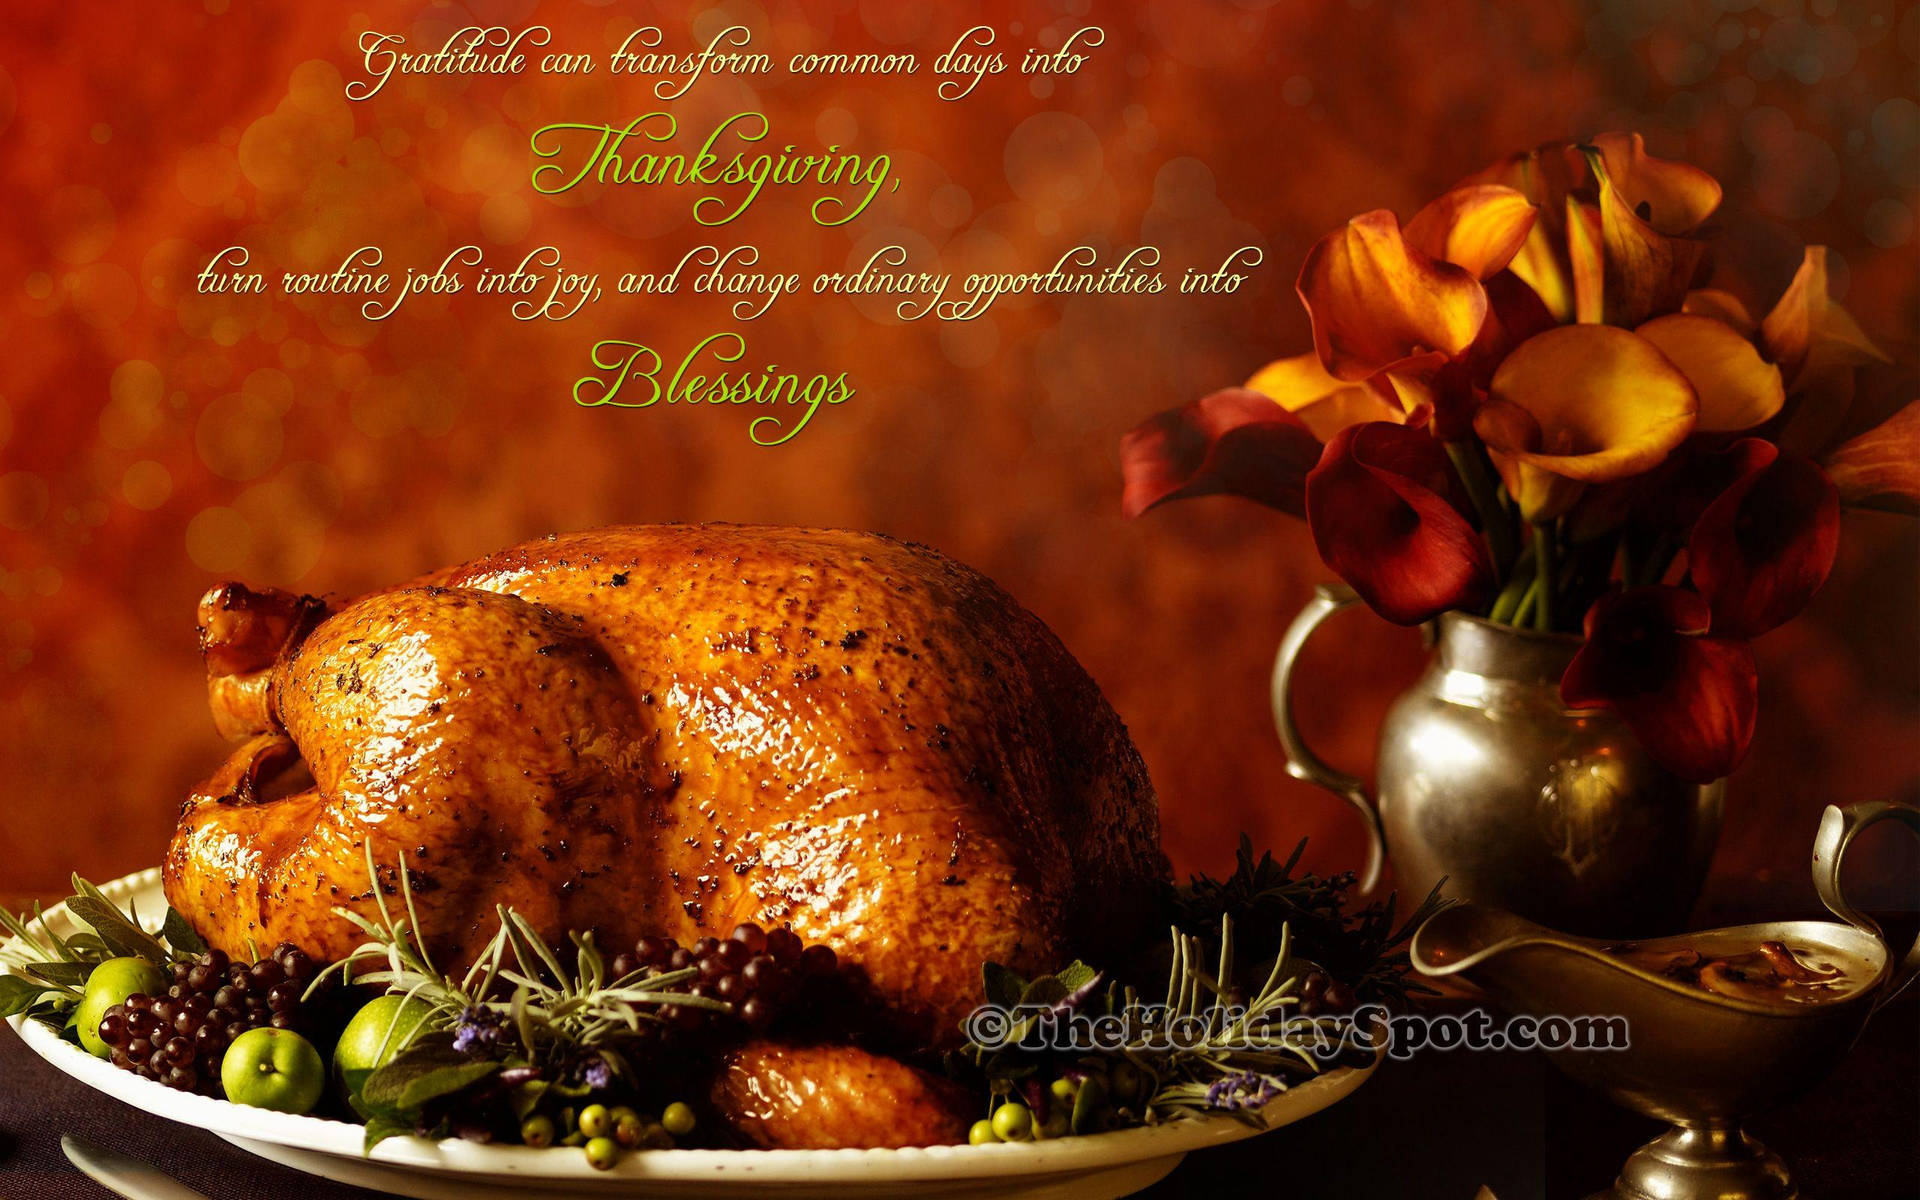 "Enjoy a delicious Thanksgiving Turkey with friends and family!" Wallpaper